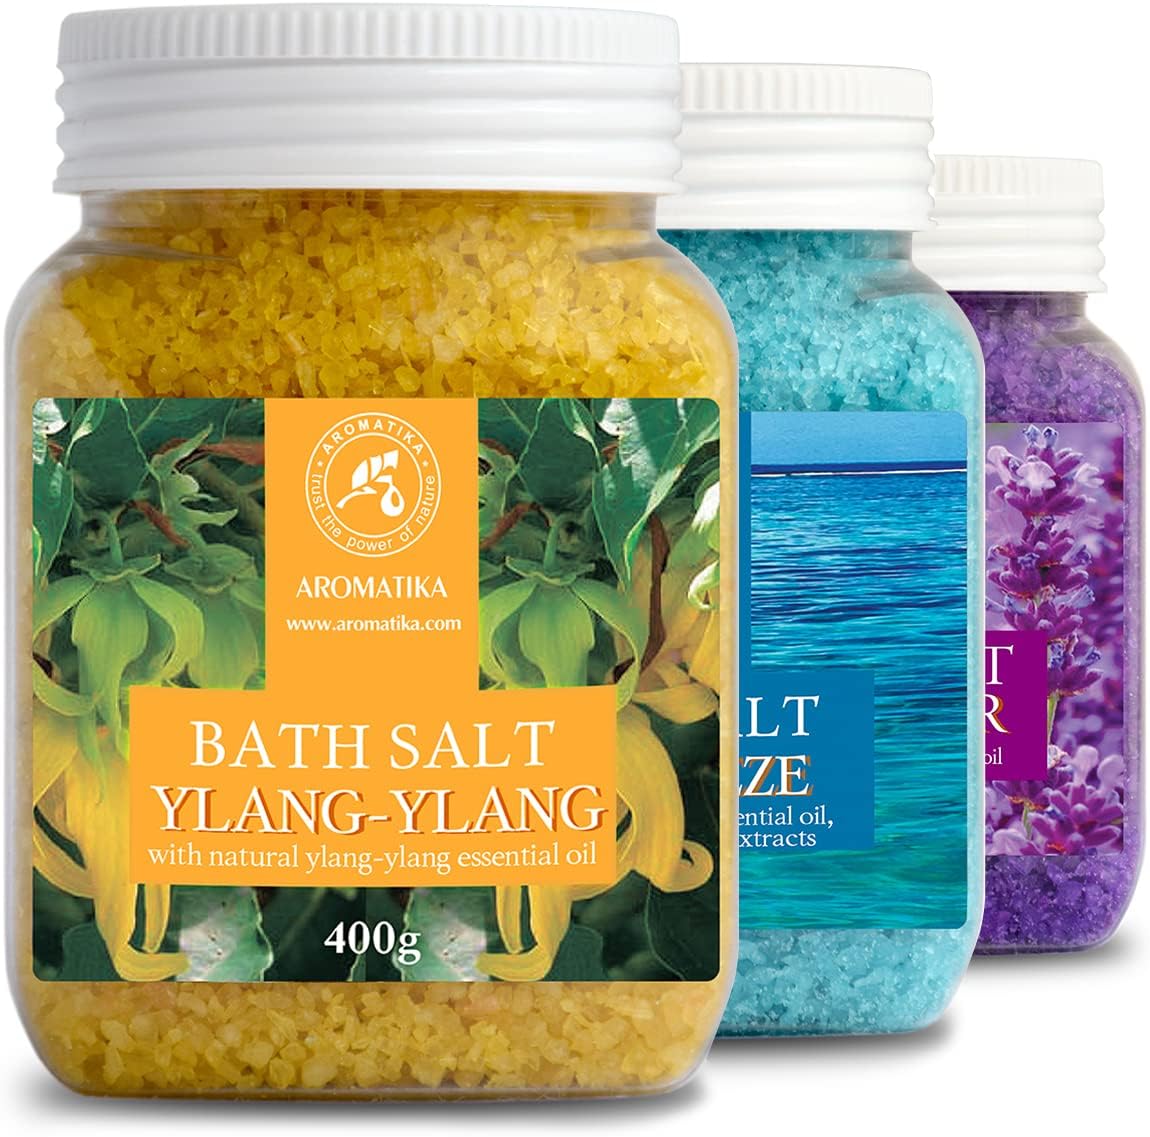 Bath Salts Set 42 Oz - Lavender - Sea Breeze - Ylang-Ylang - 100% Natural Essential Oil - Bathing - Body Care - Beauty - Relaxation - Spa